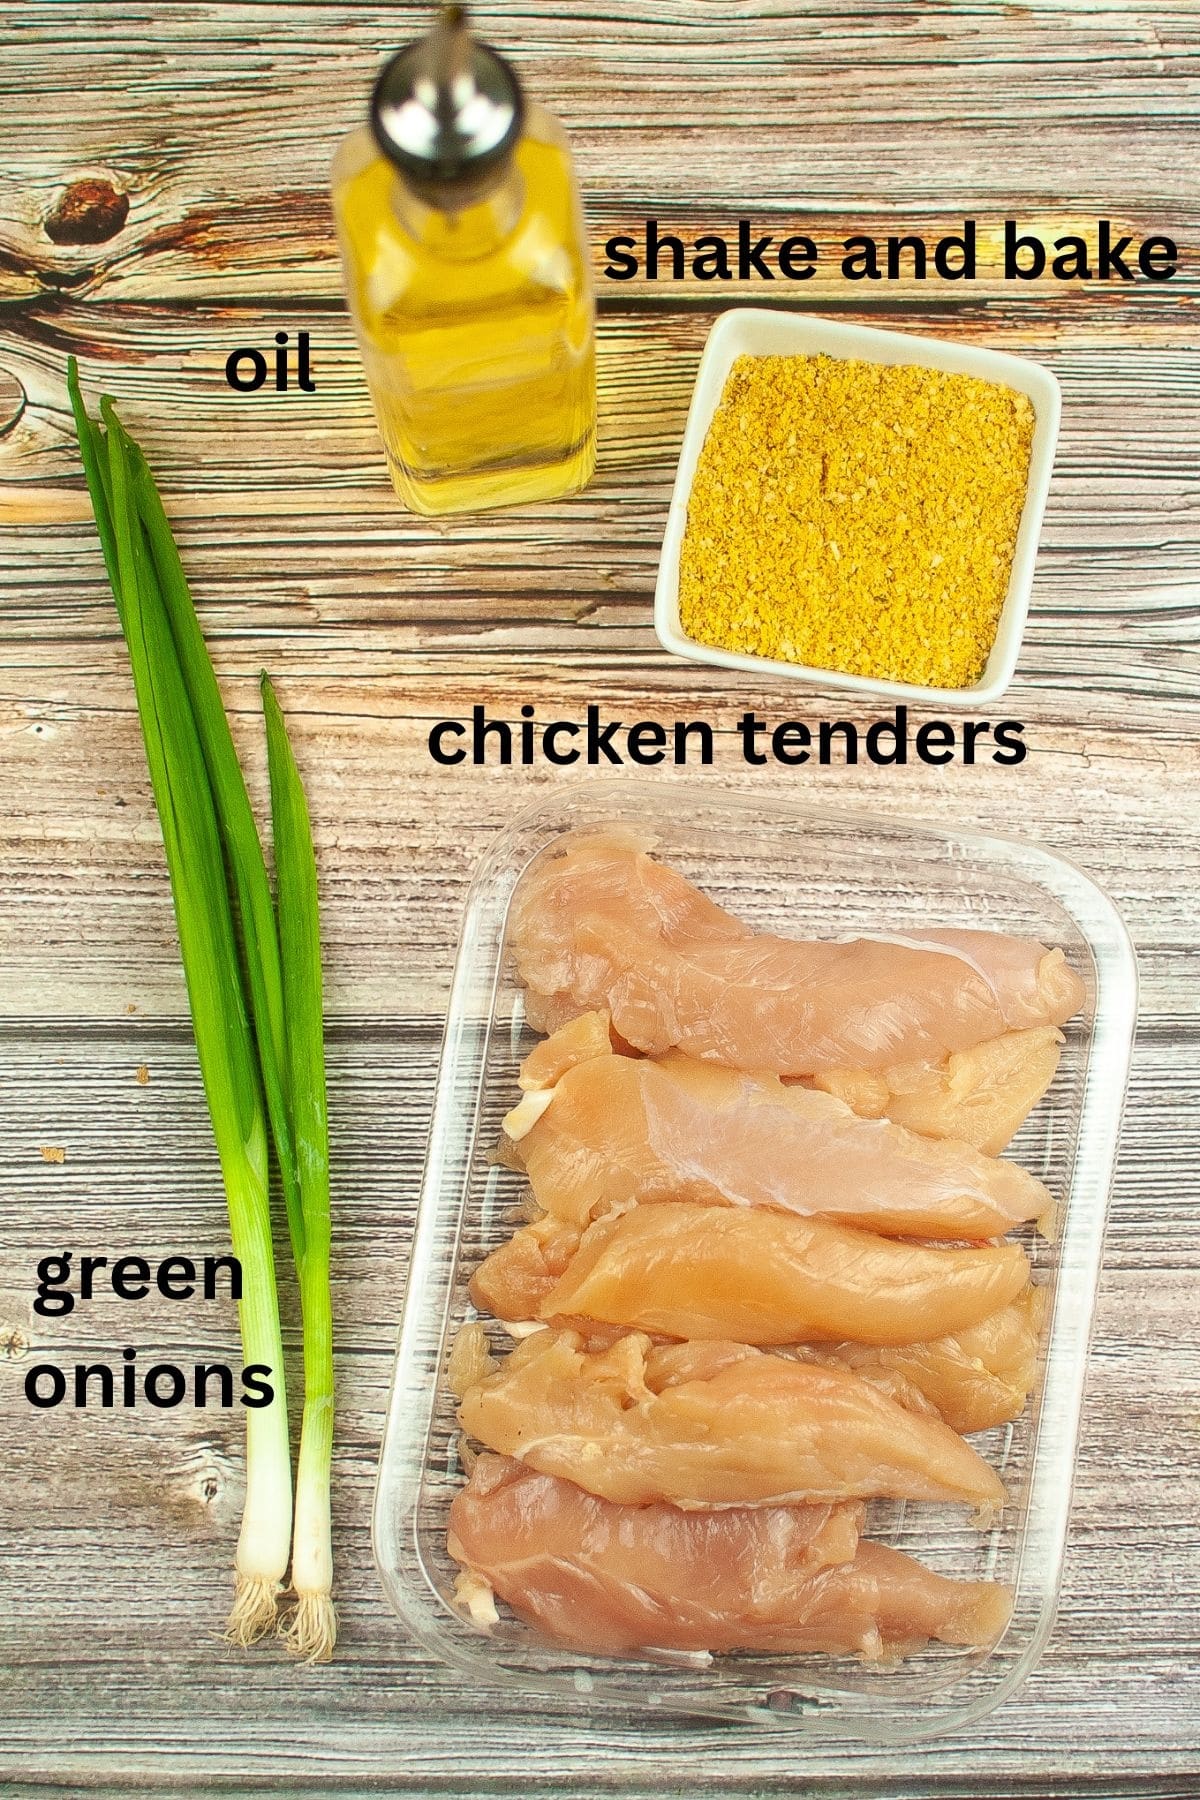 chicken tenders, shake and bake, oil and green onions on a wooden background